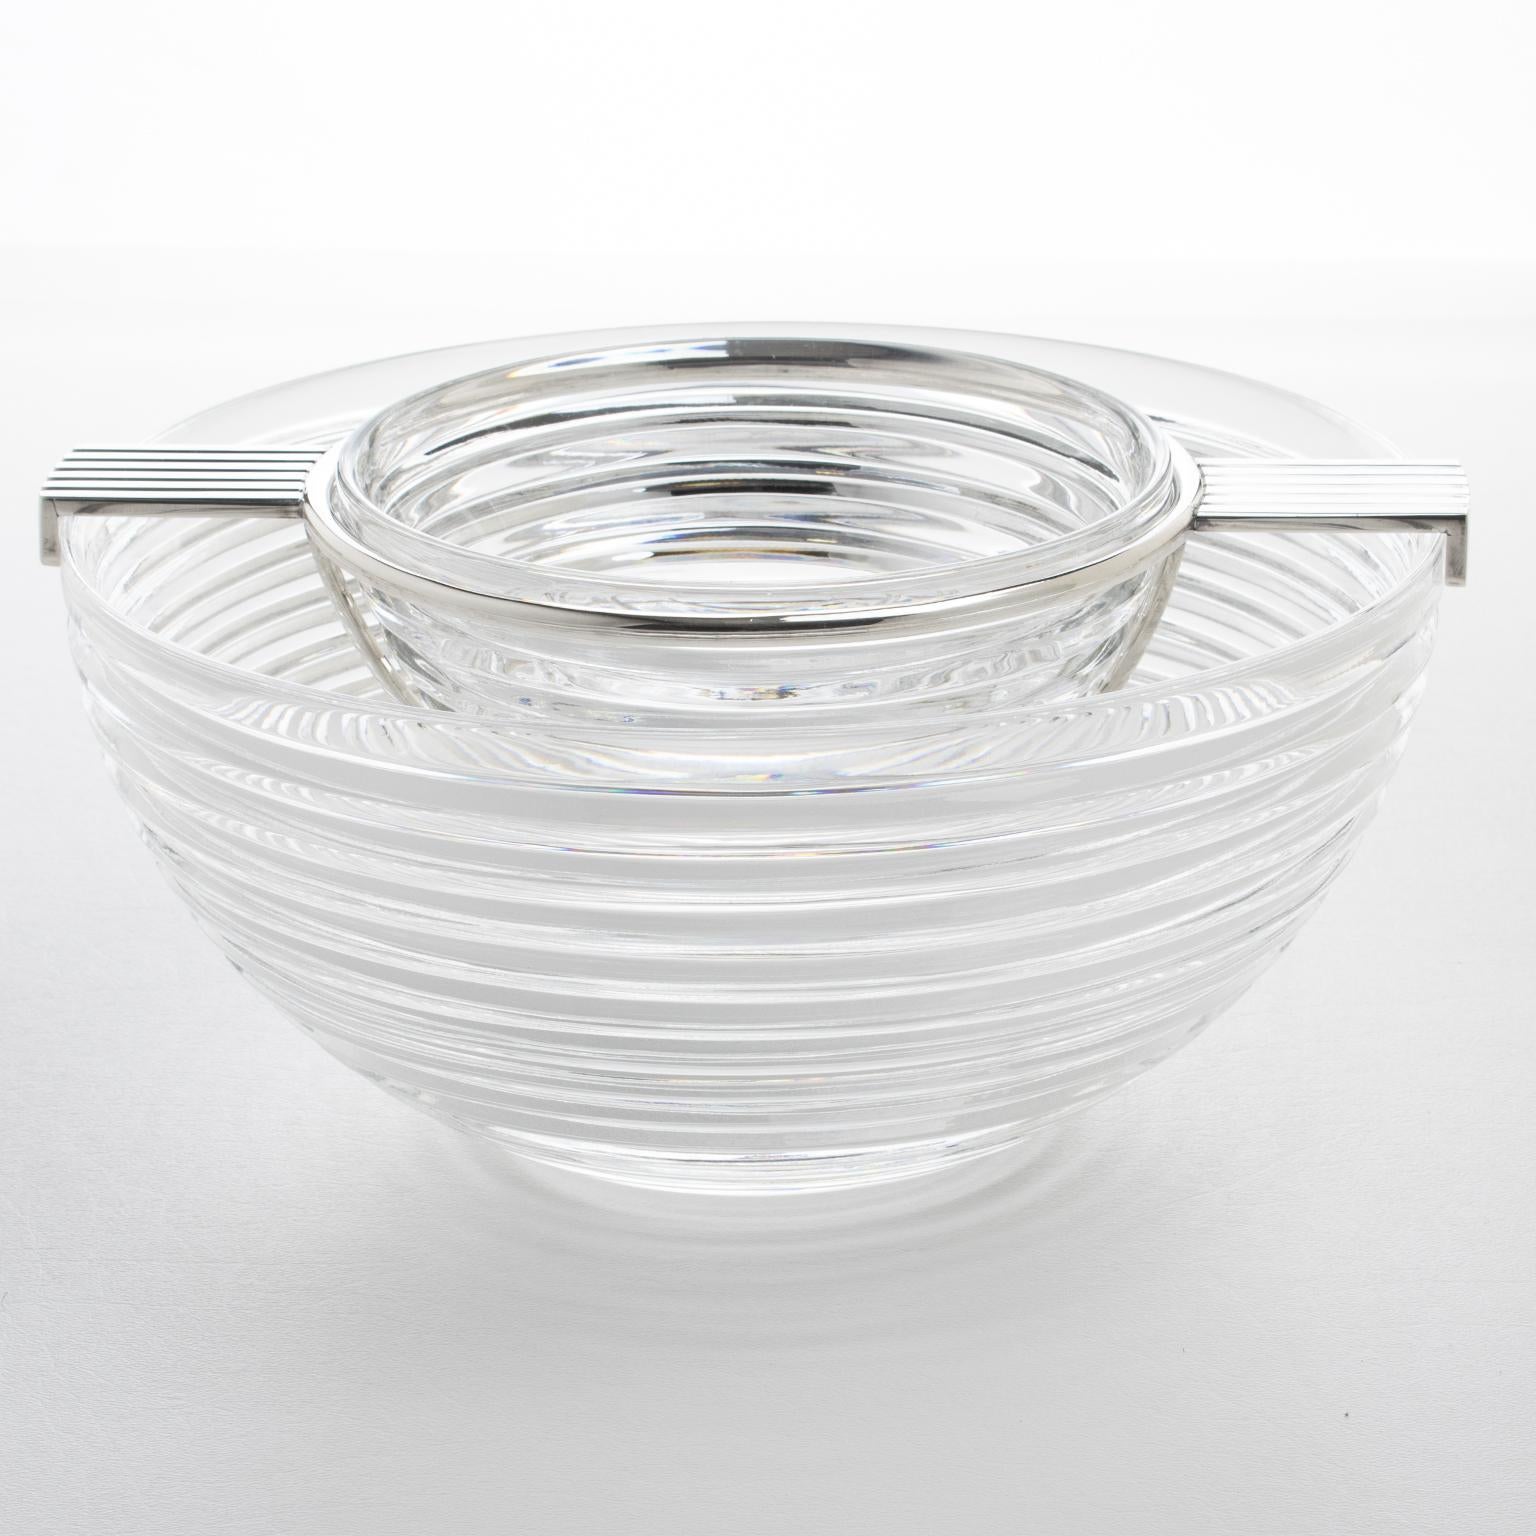 This elegant caviar serving bowl or dish from Riedel's Mesa collection was crafted in Italy during the 1980s. Its sleek modernist design showcases a geometric shape with a stunning stepped crystal container, complemented by a silver plate metal